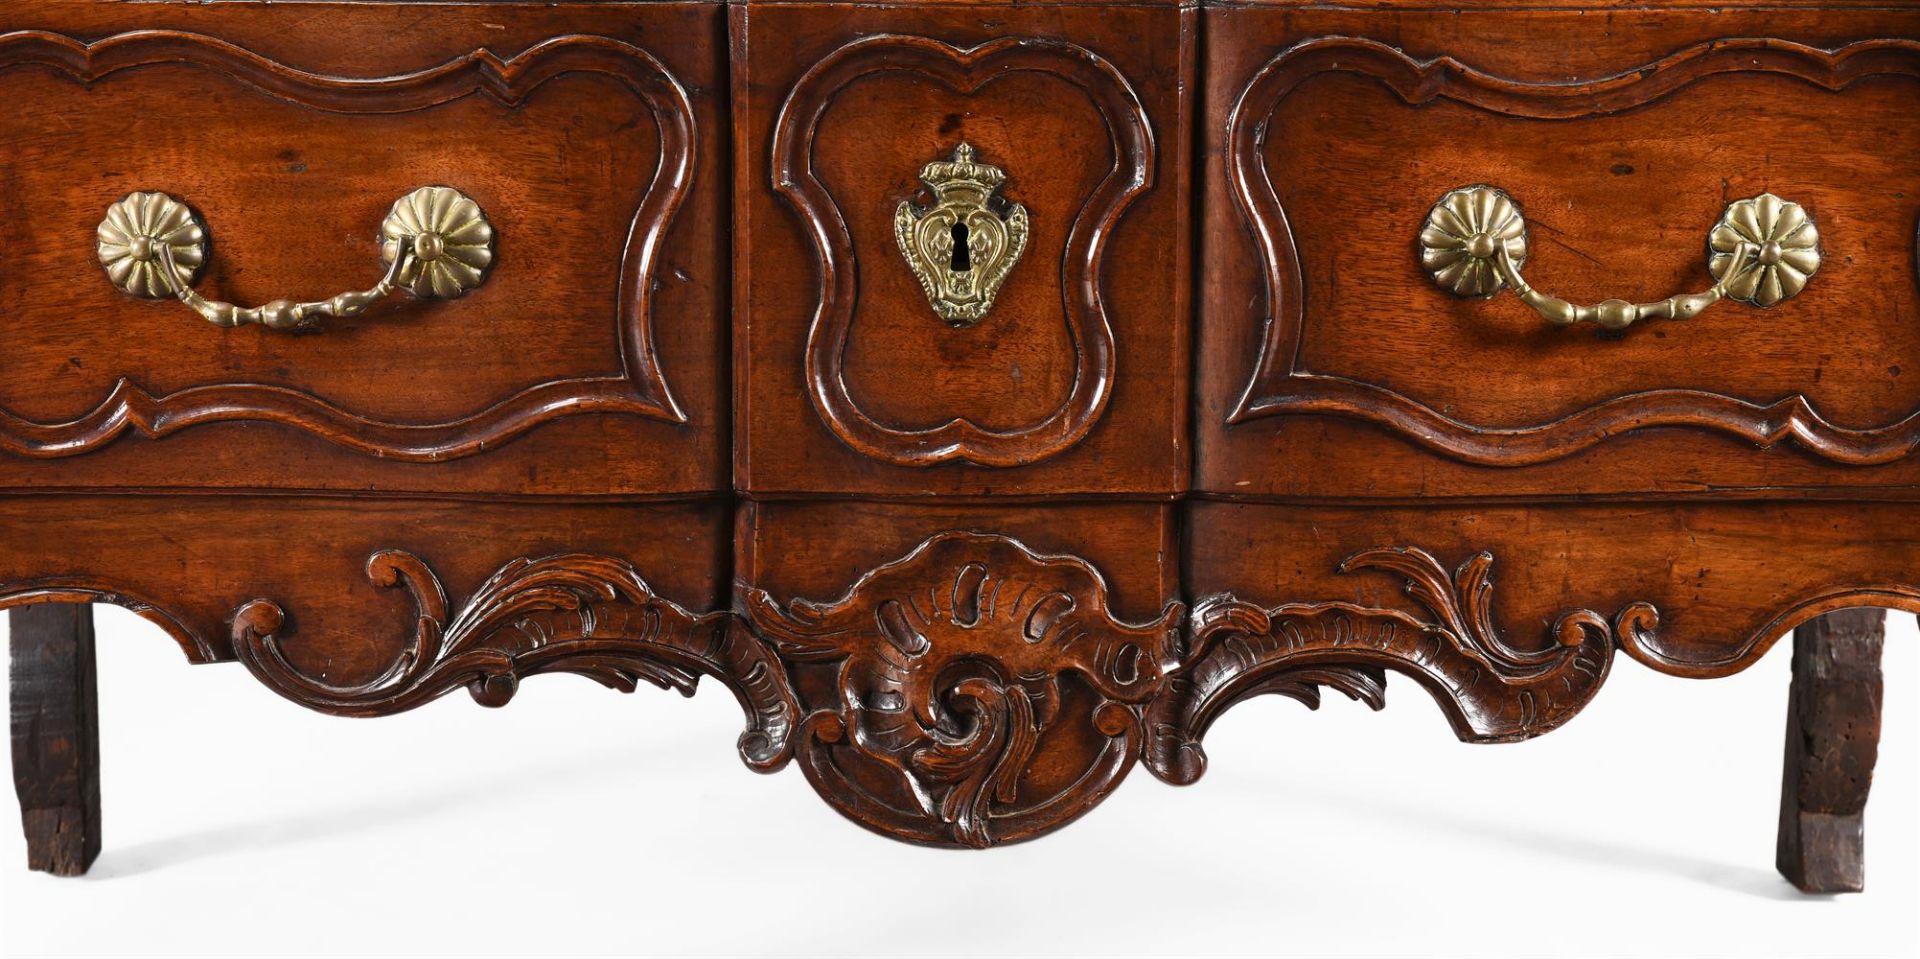 A LOUIS XV WALNUT COMMODE, SECOND HALF 18TH CENTURY - Image 2 of 4